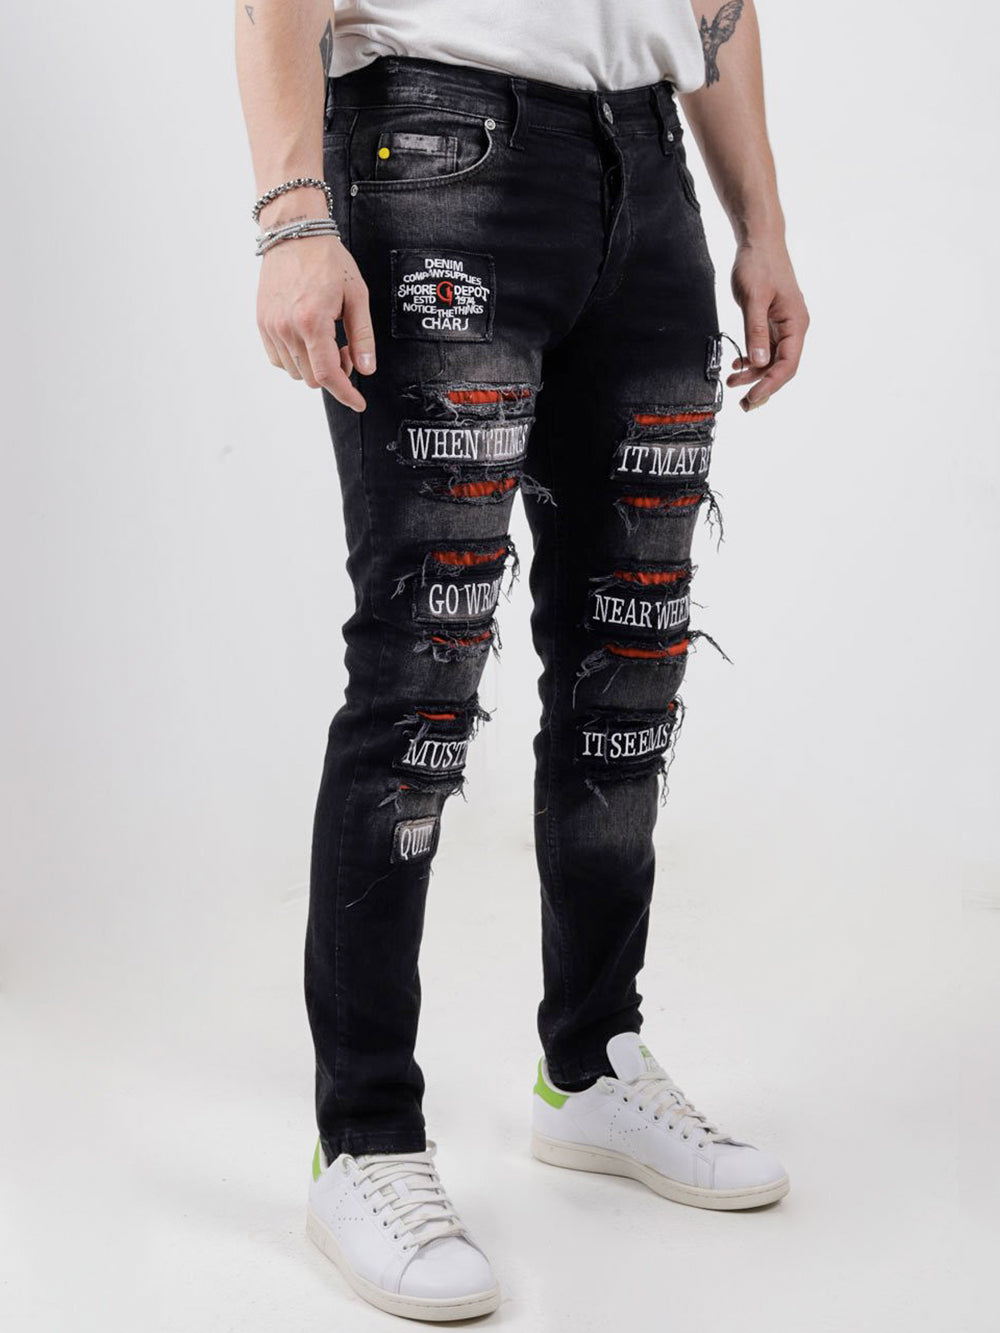 A man wearing PAW TRAIL ripped jeans and a t - shirt.